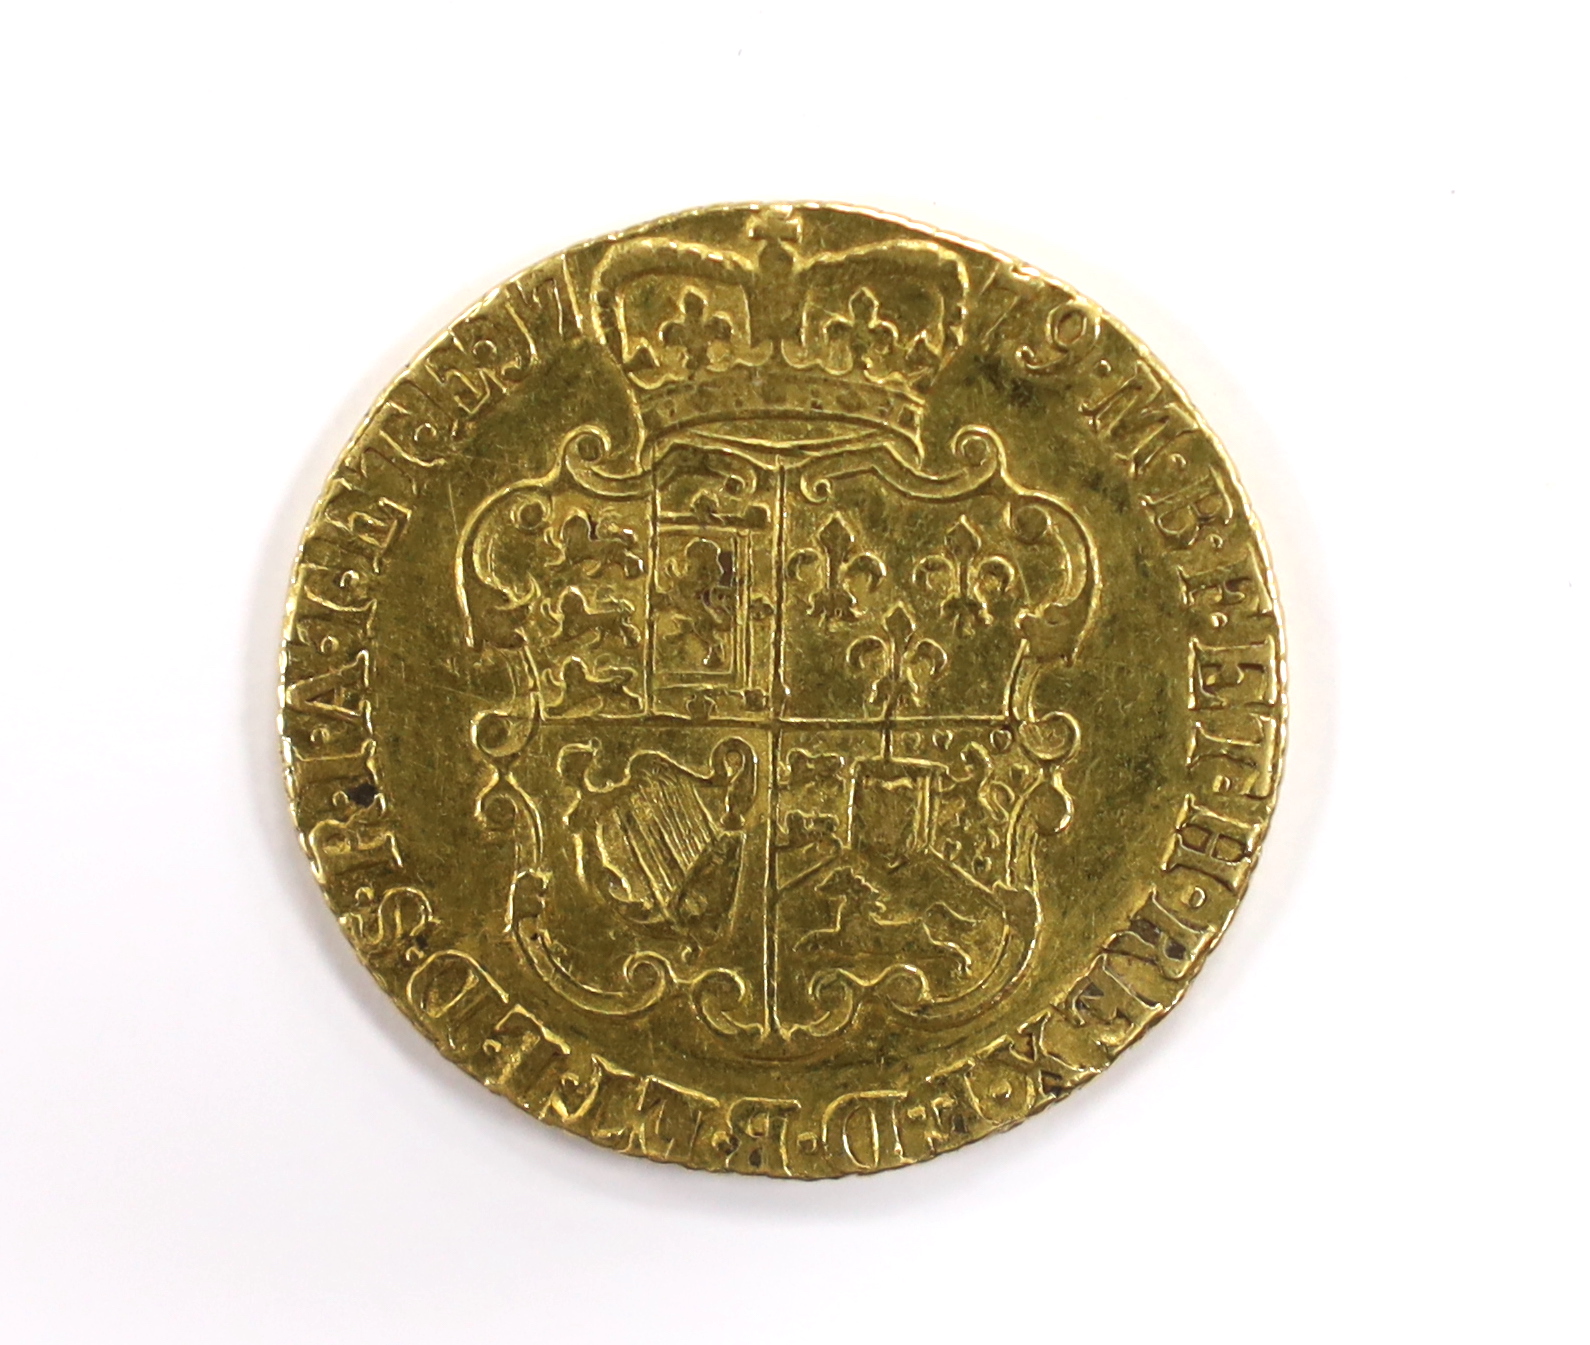 British gold coins - A George III gold guinea, 1779, fourth head, VF, (S3728), Provenance - bought from Richard Lobel and co, London, 7th March 1977 for £170.                                                              